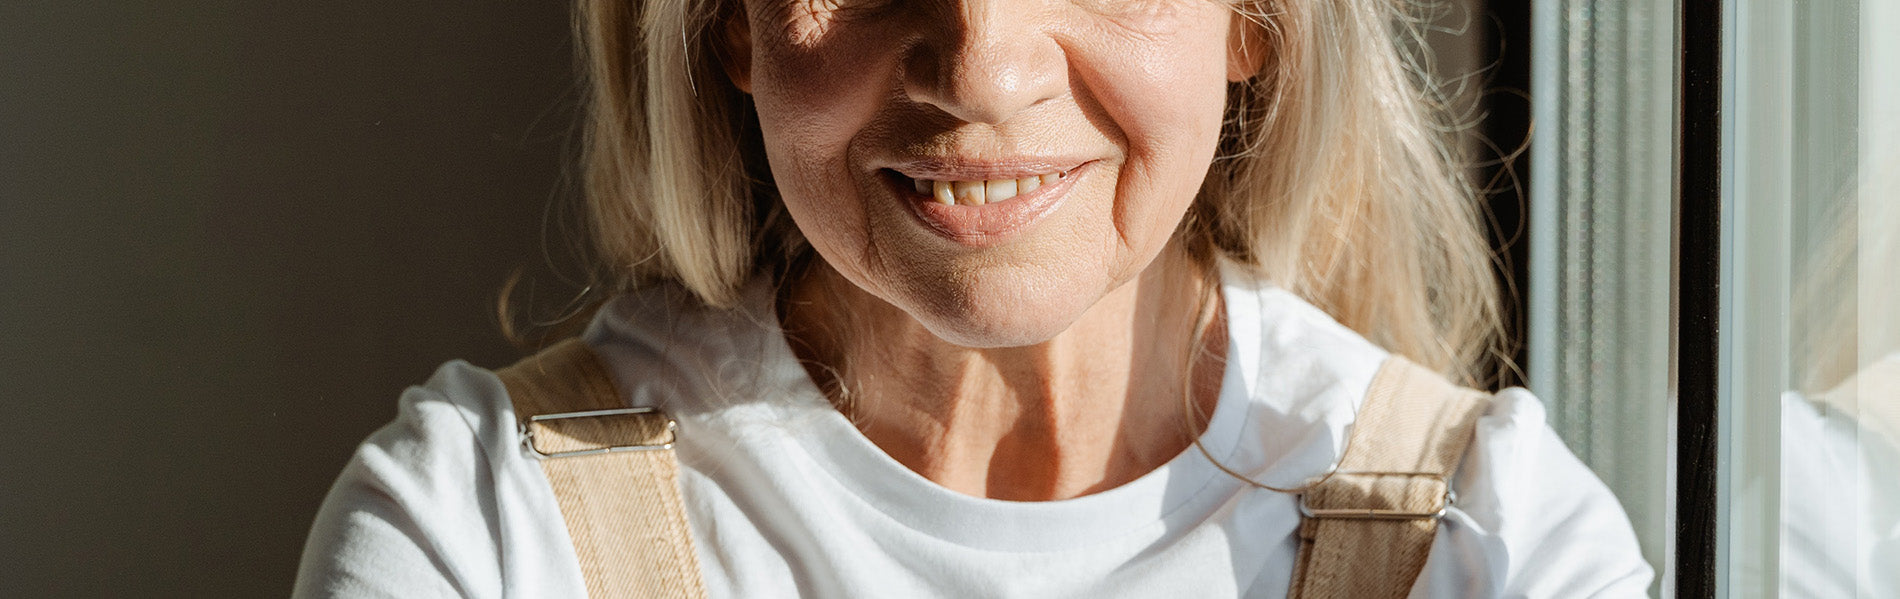 Fine Lines Versus Wrinkles: The Difference & How To Address Them Both